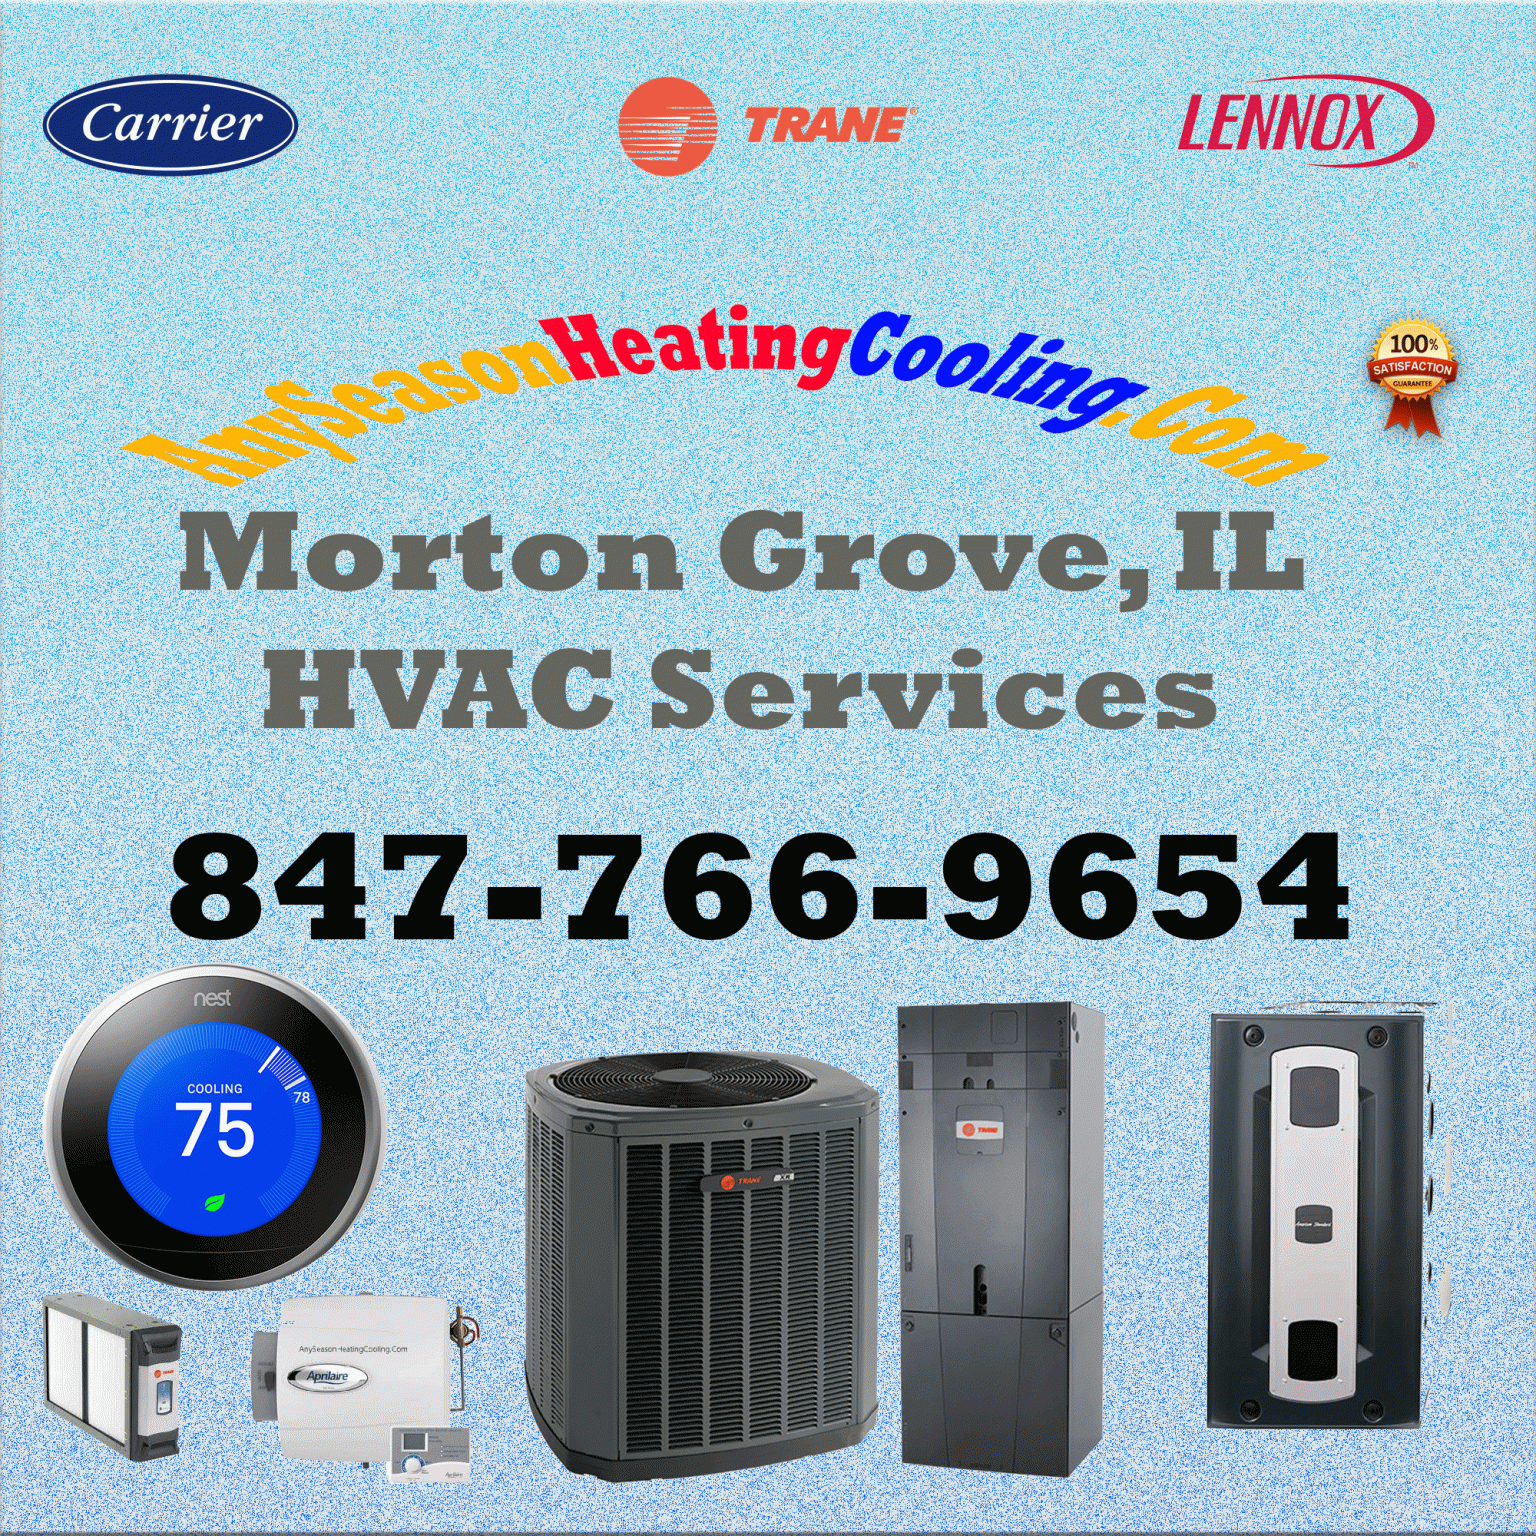 Morton Grove IL Furnace Replacement for Less